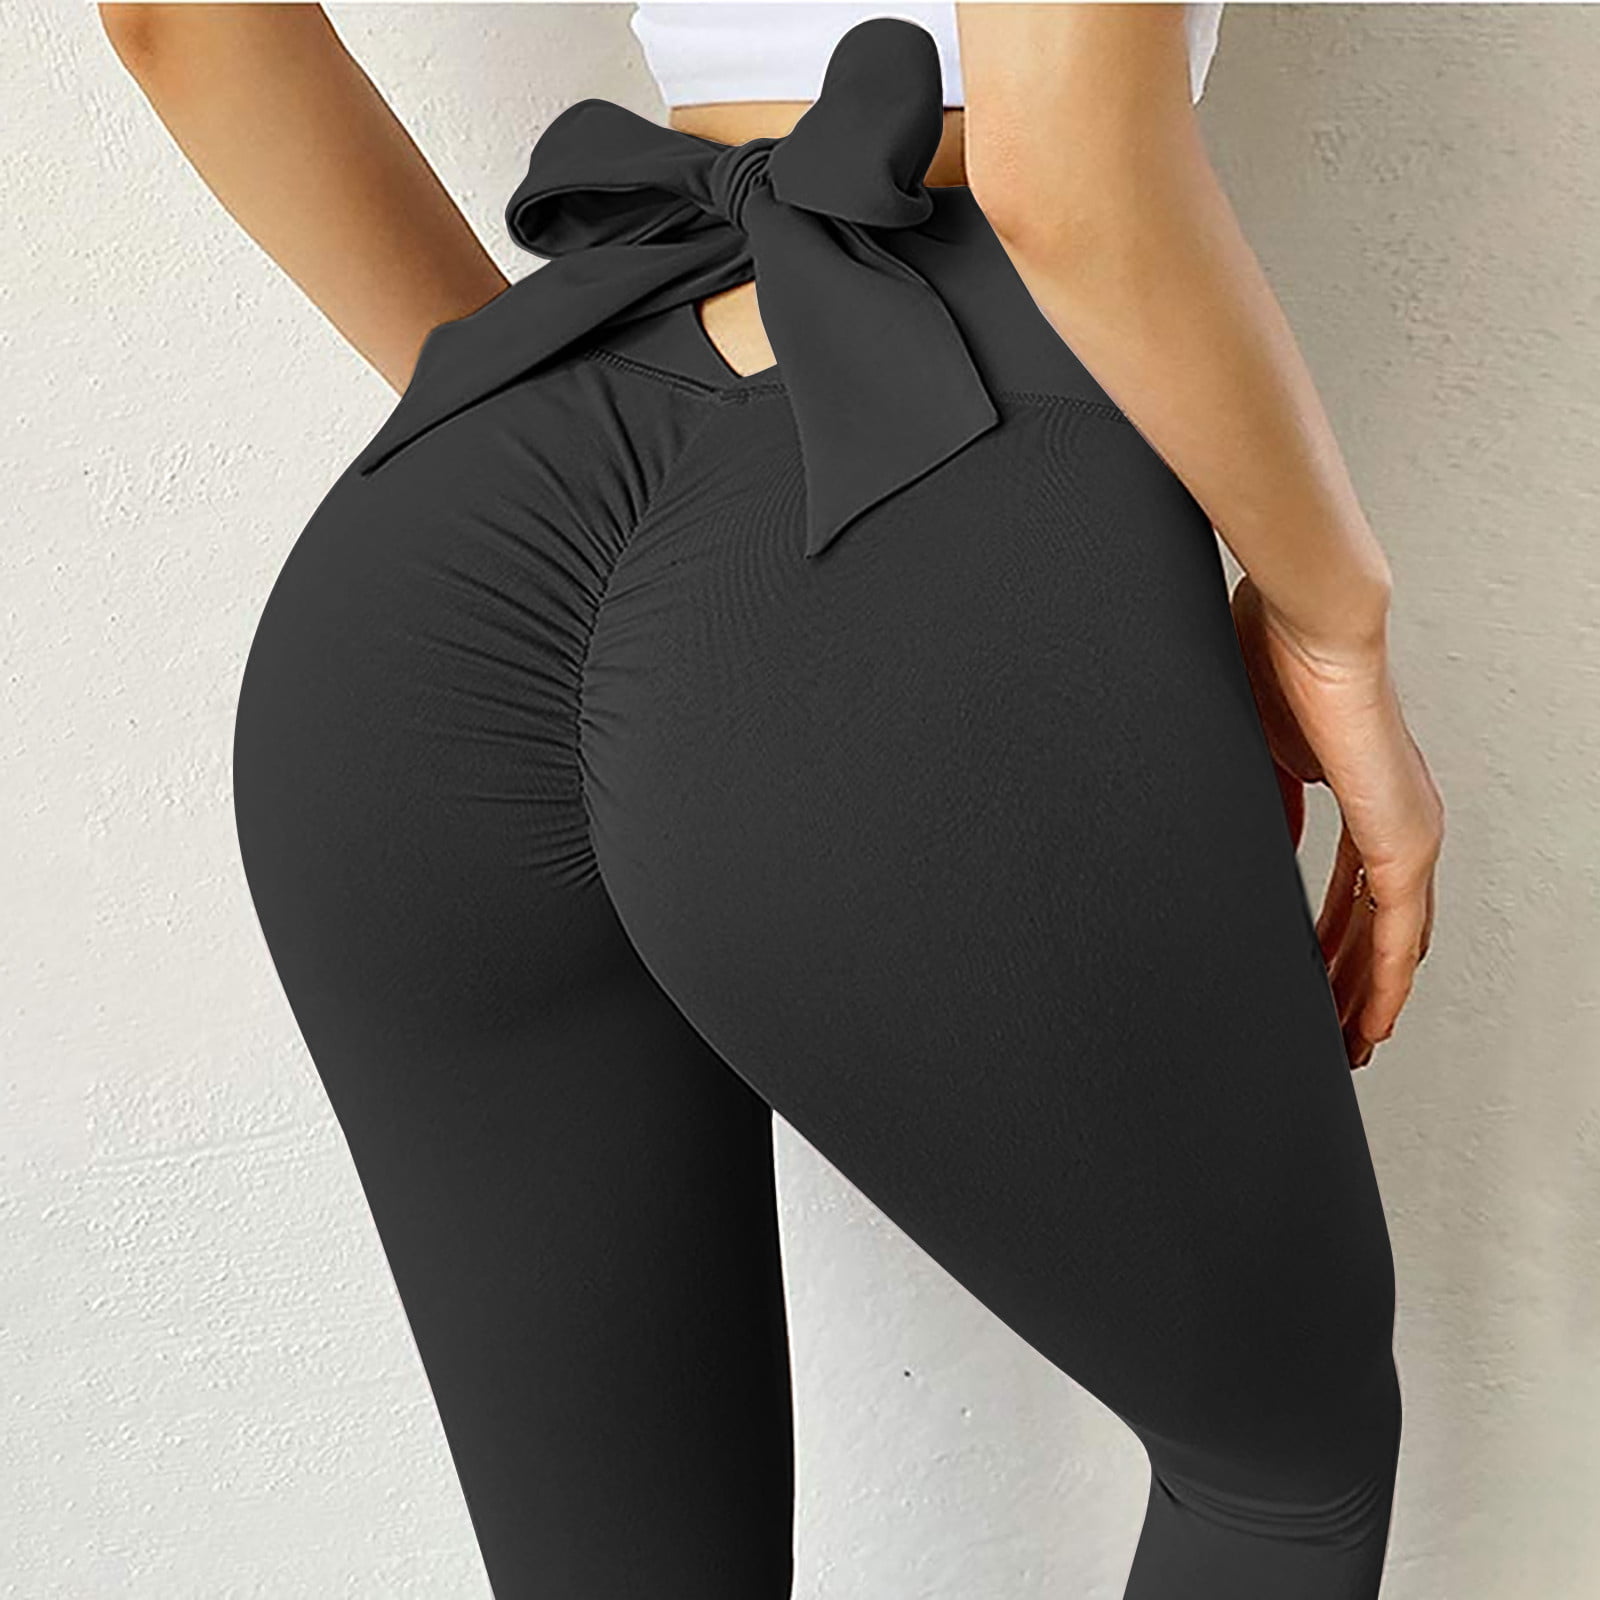 Aayomet Yoga Pants For Women Bootcut Leggings for Women-No See-Through High  Waisted Tummy Control Yoga Pants Workout Running Legging,Black M 